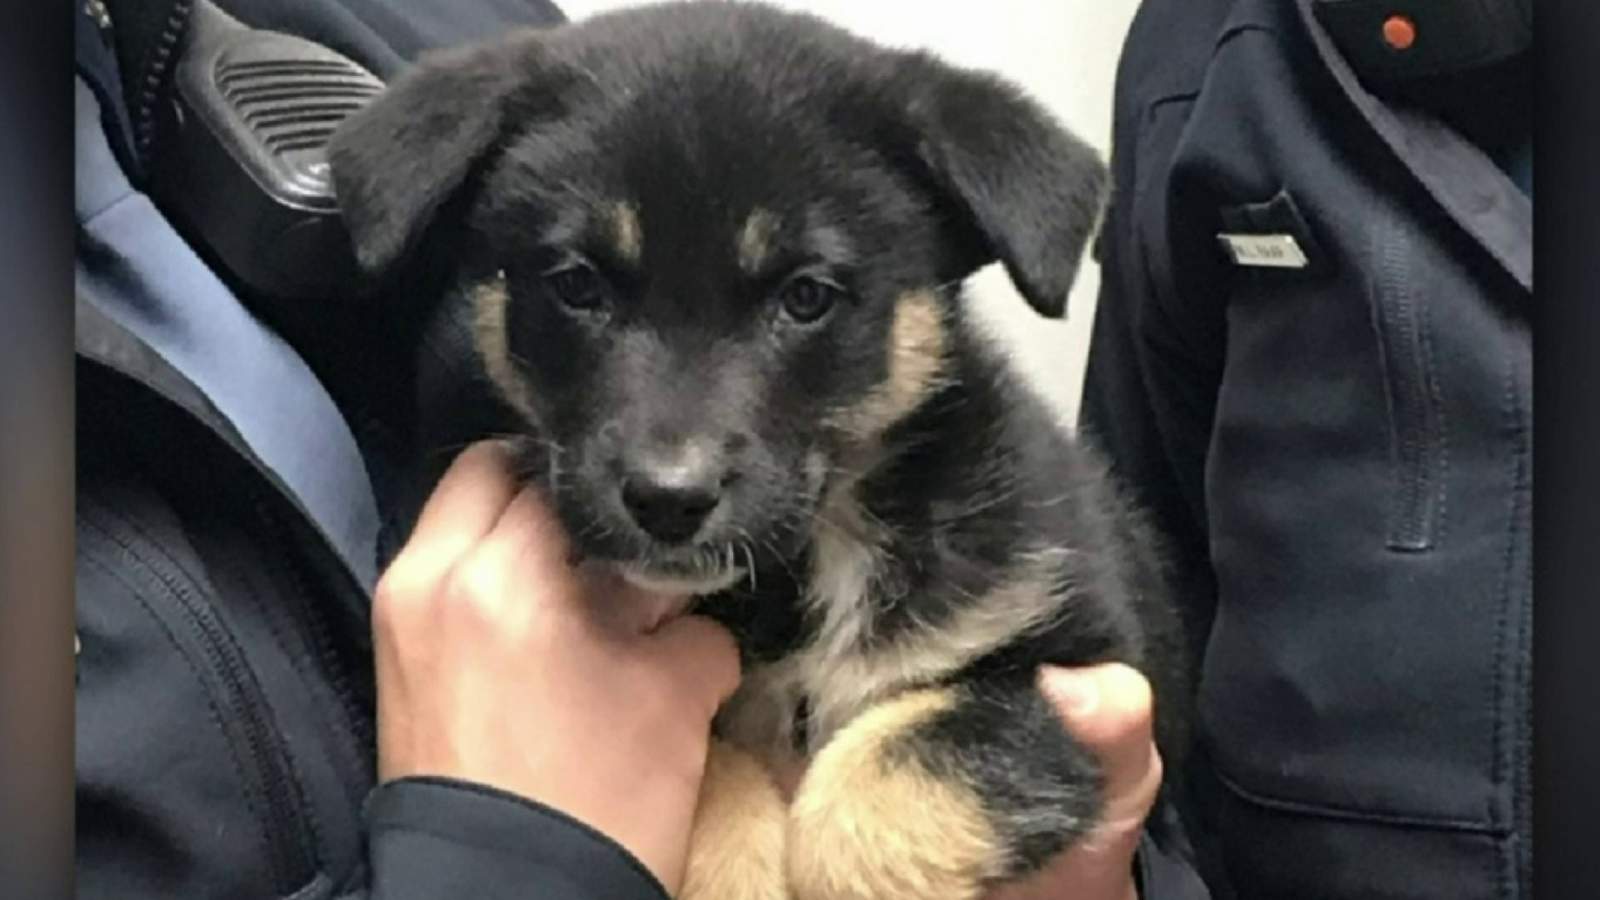 Michigan State Police troopers rescue puppy found in abandoned vehicle along I-75